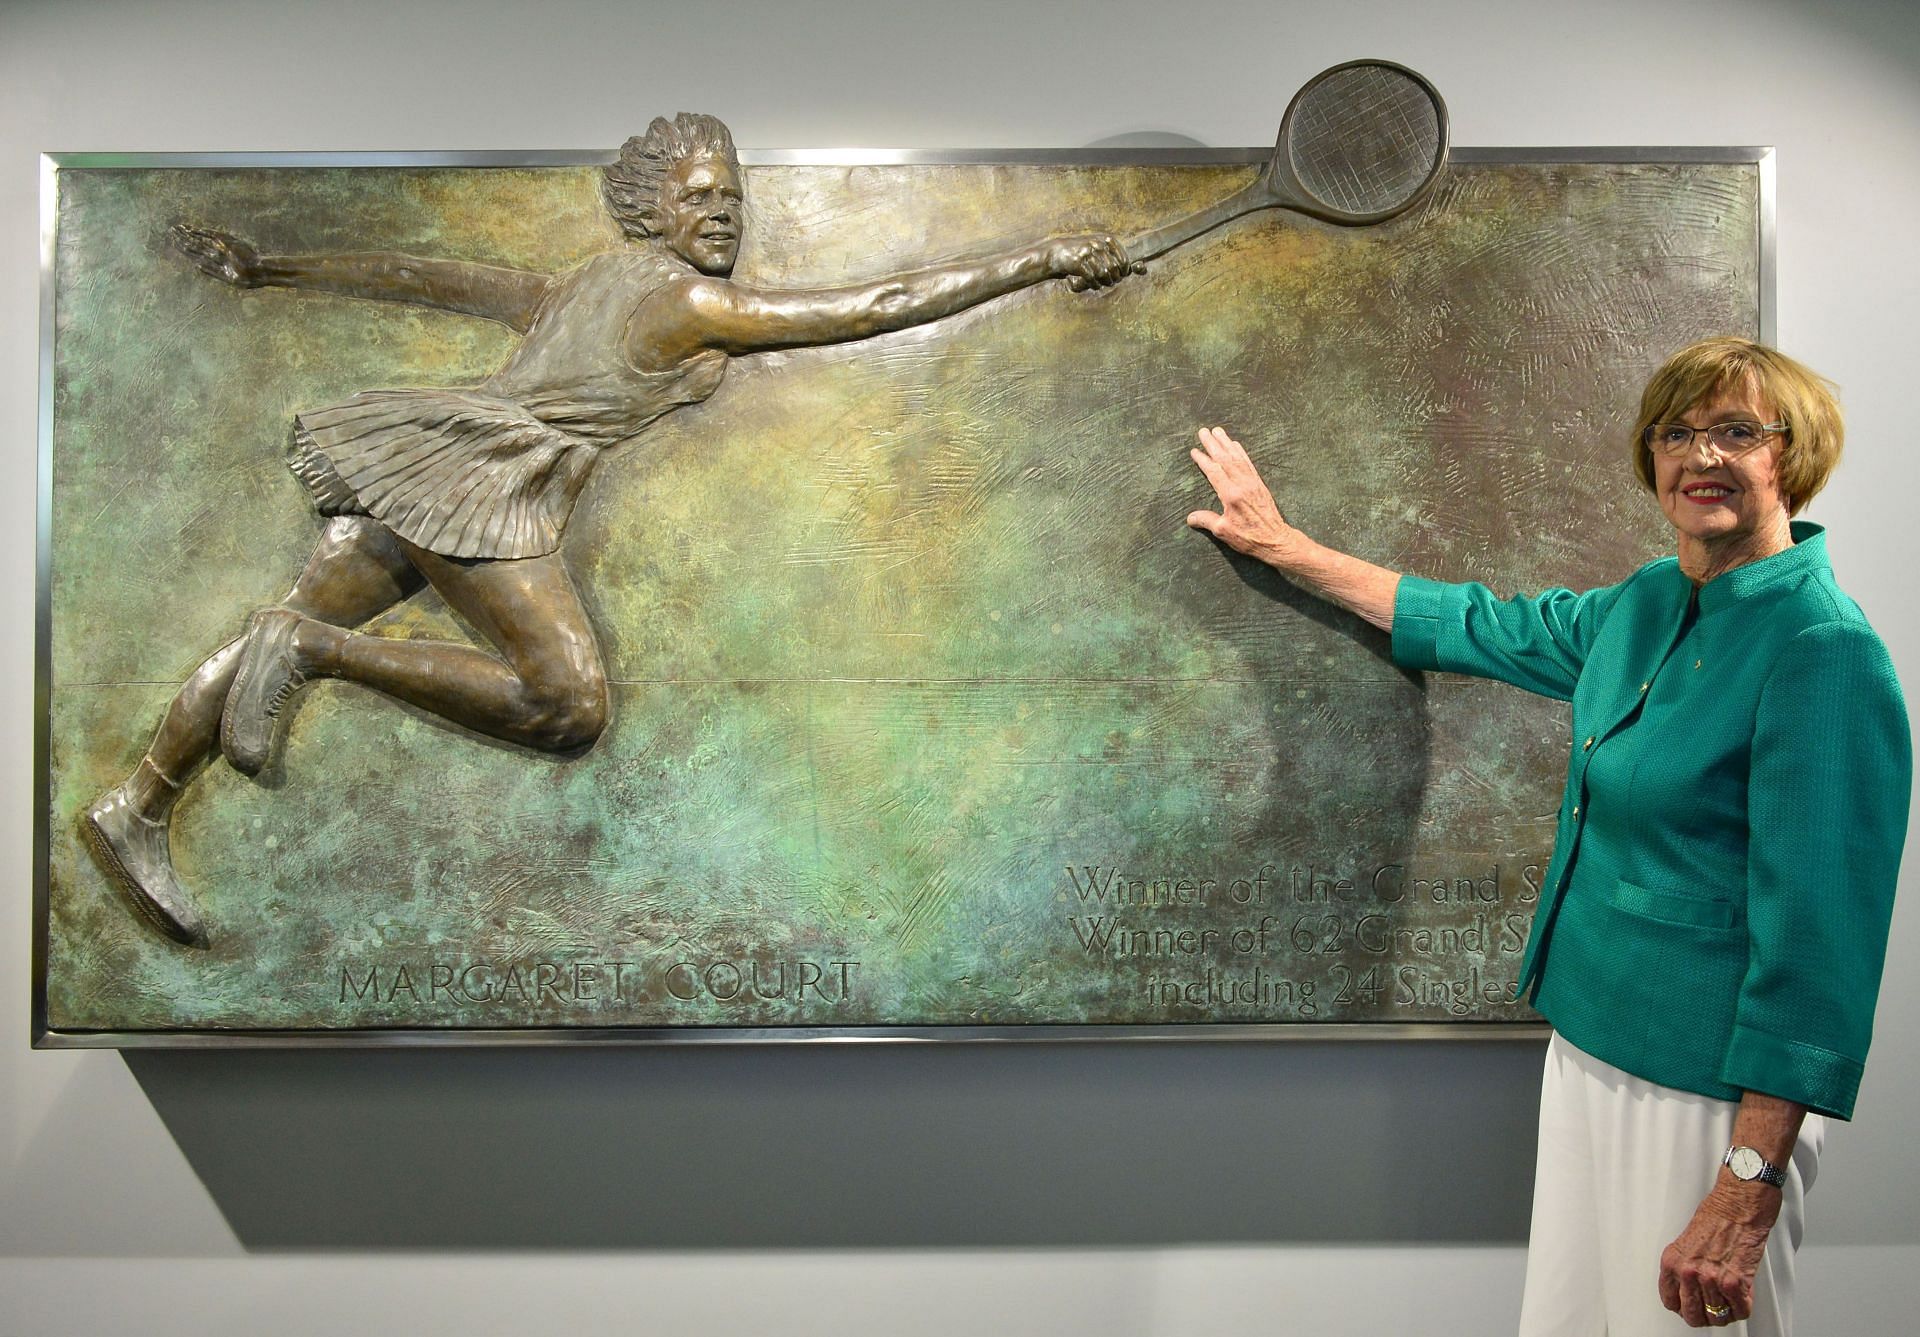 Margaret Court reckons she would have dominated the modern era of tennis